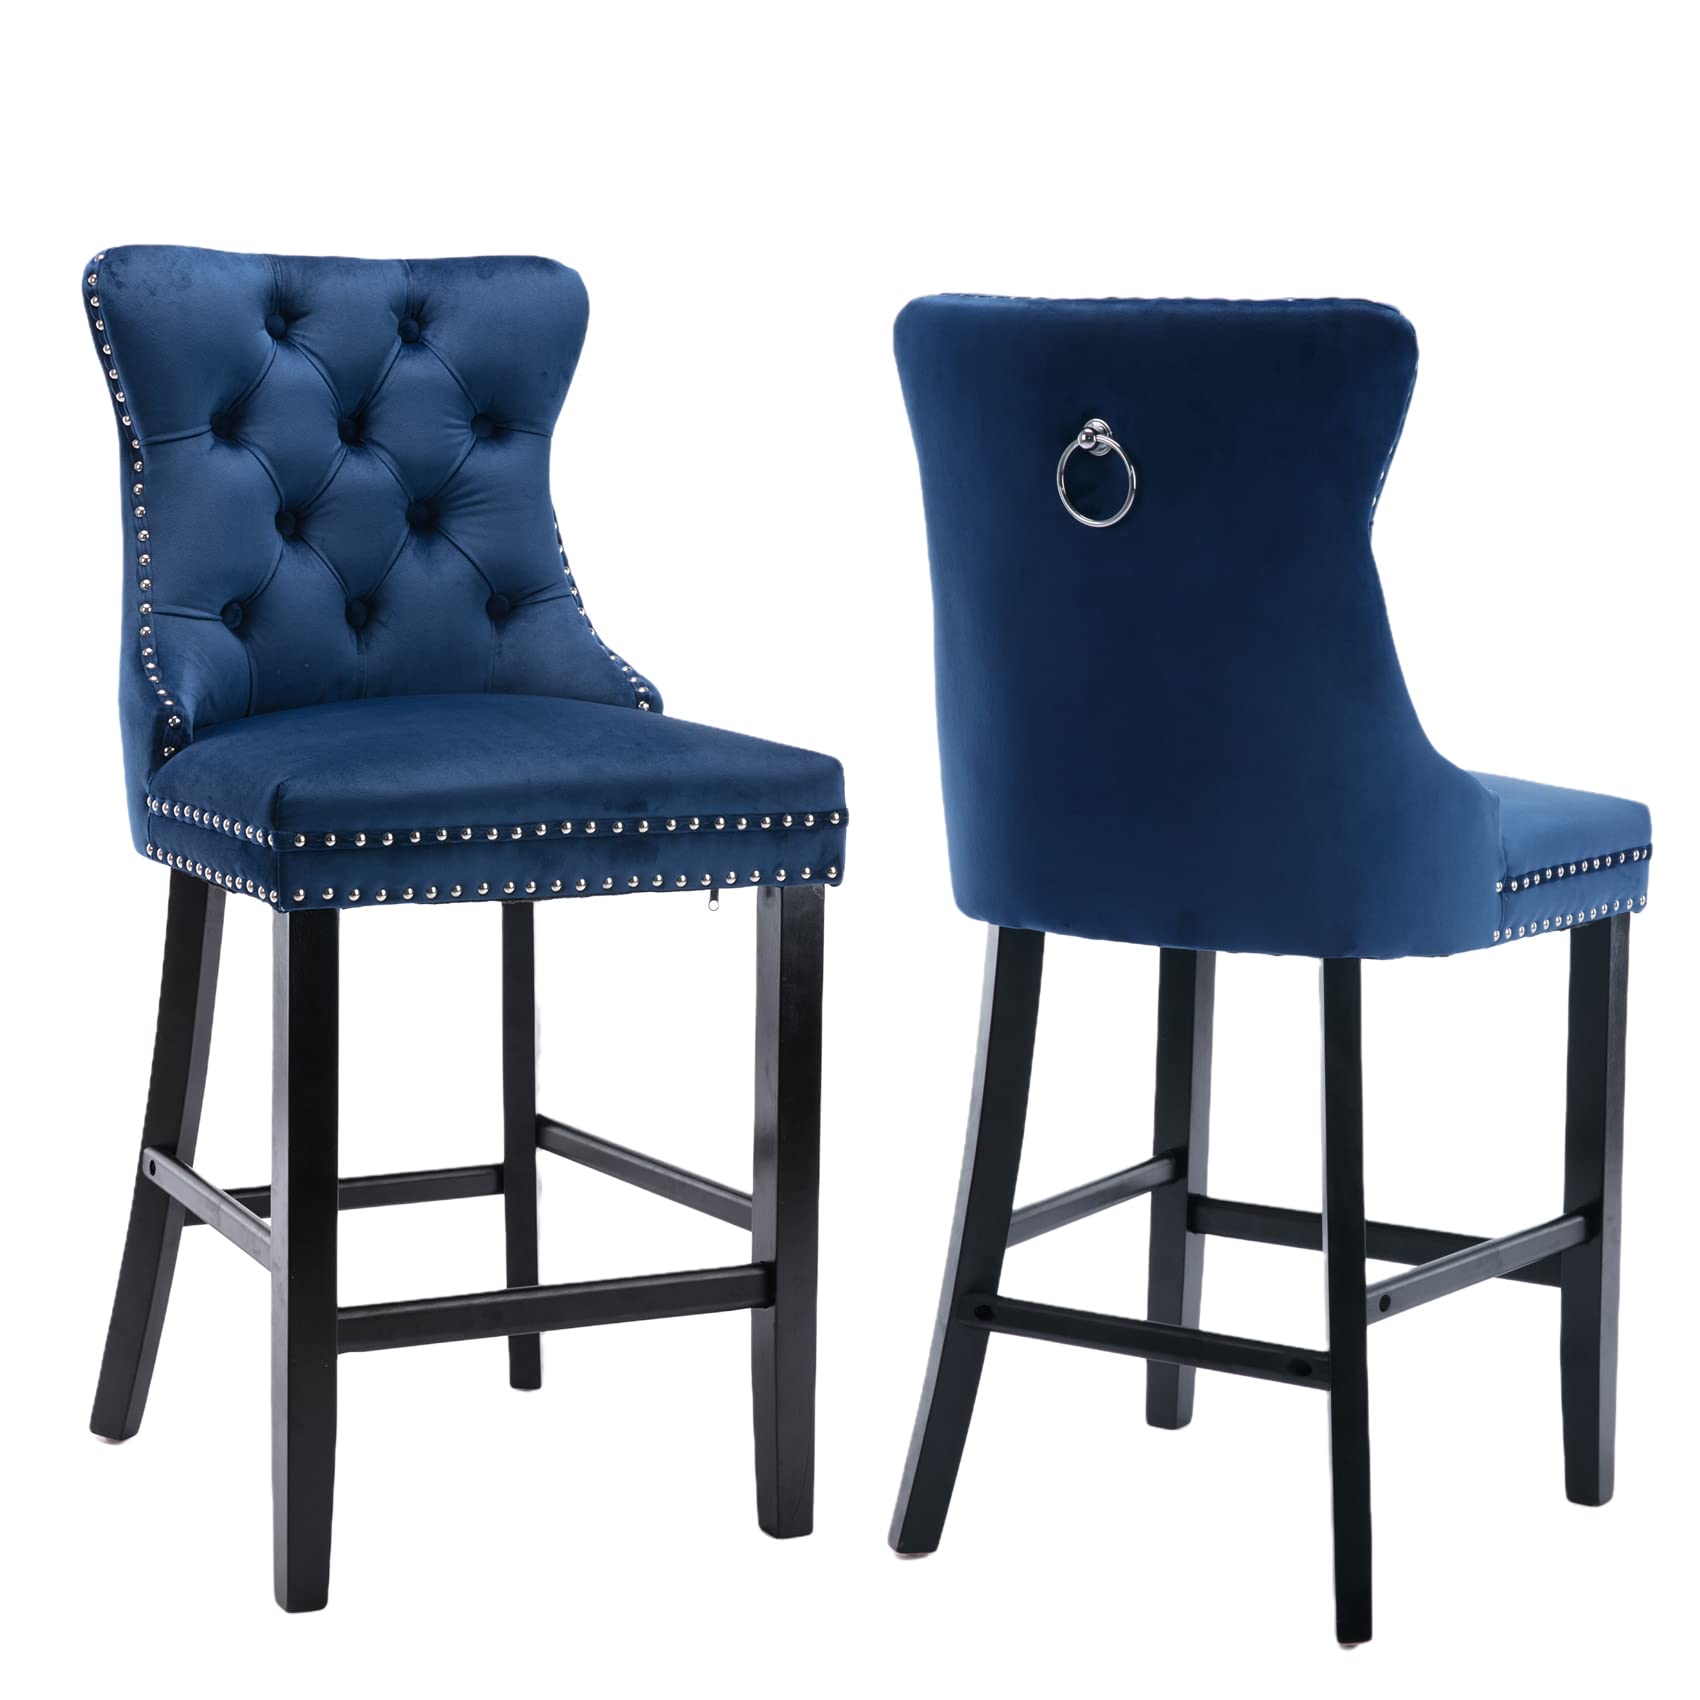 2X Velvet Bar Stools with Studs Trim Wooden Legs Tufted Dining Chairs Kitchen - image18